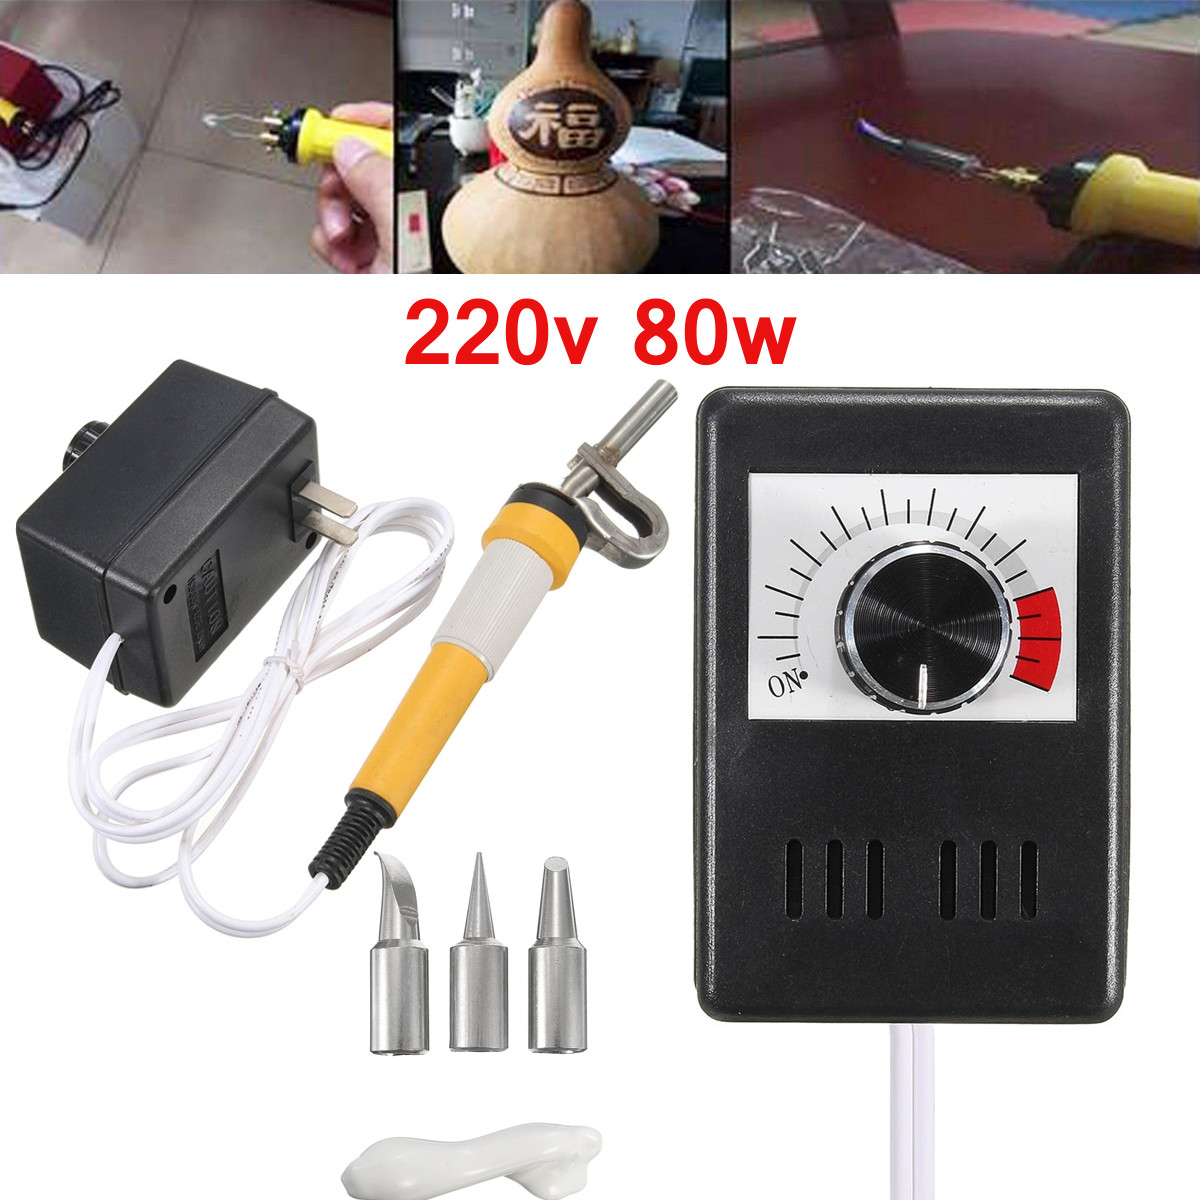 220V-80W-Adjustable-Temperature-Gourd-Wood-Multifunction-Pyrography-Machine-Heating-Wire-Pen-Kit-Too-1146807-9